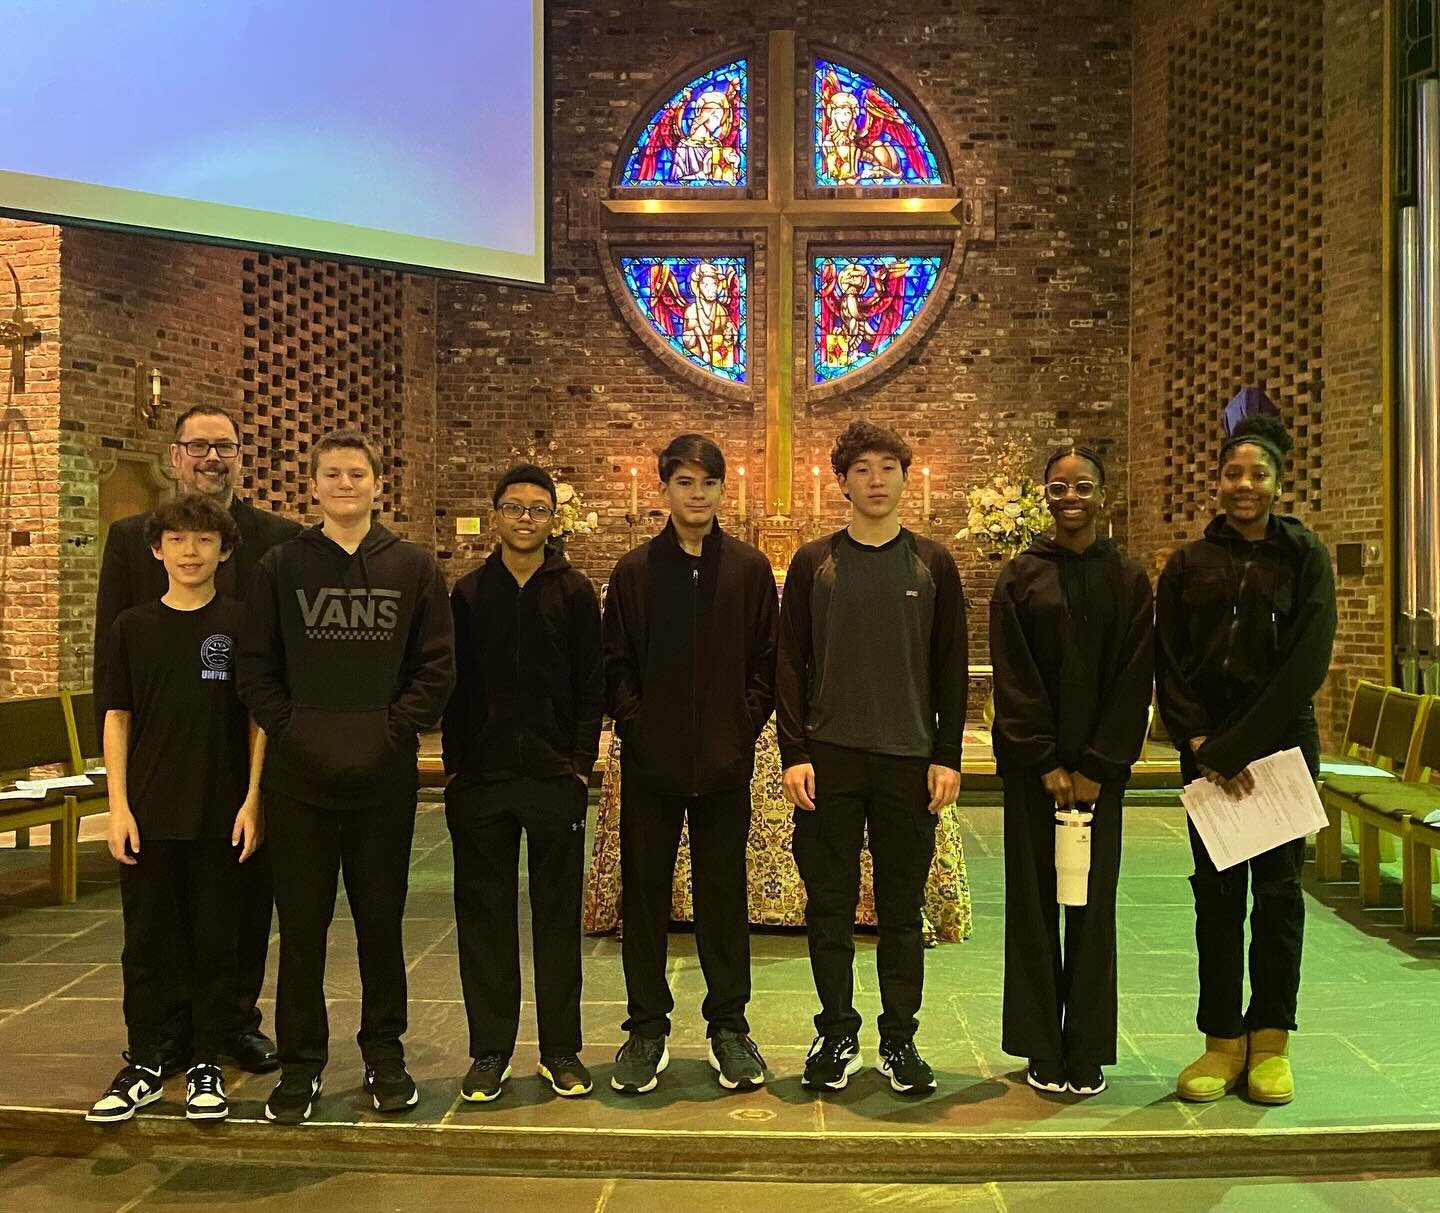 TCS 8th Graders and Pastor Hartwell led a thoughtful Tenebrae Service on the Stations of the Cross this morning, complete with a beautiful &ldquo;Were You There?&rdquo; duet by Sean and Jazmain 🙏🏻✝️! #HopeInTheLord